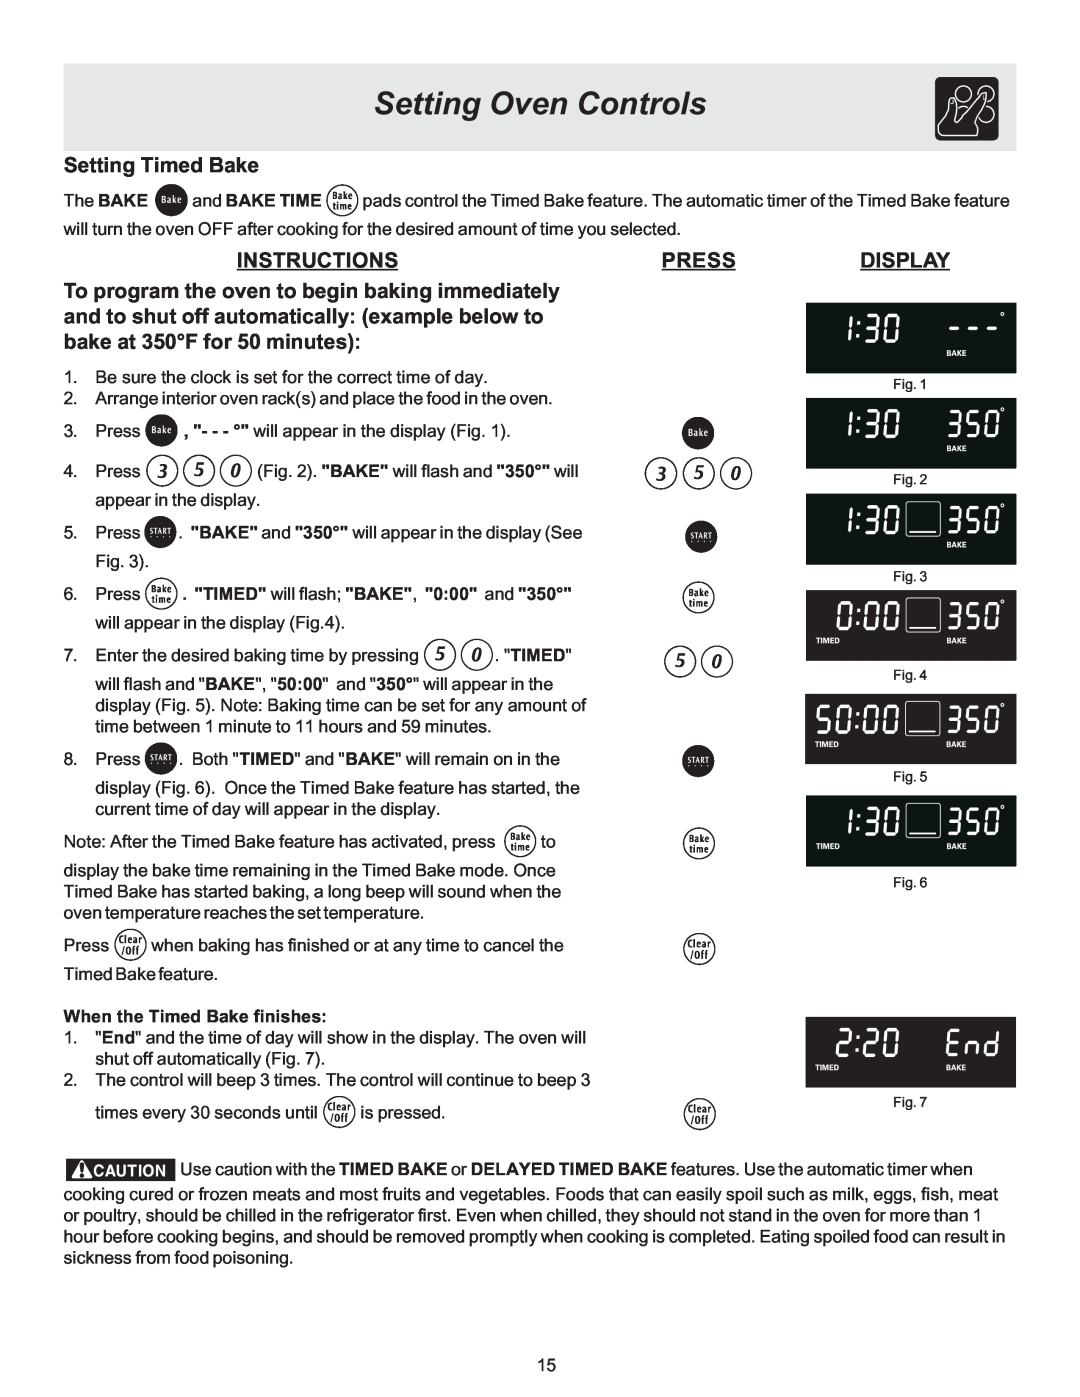 Frigidaire 316417137 REV-A Setting Timed Bake, When the Timed Bake finishes, Setting Oven Controls, Instructions, Press 